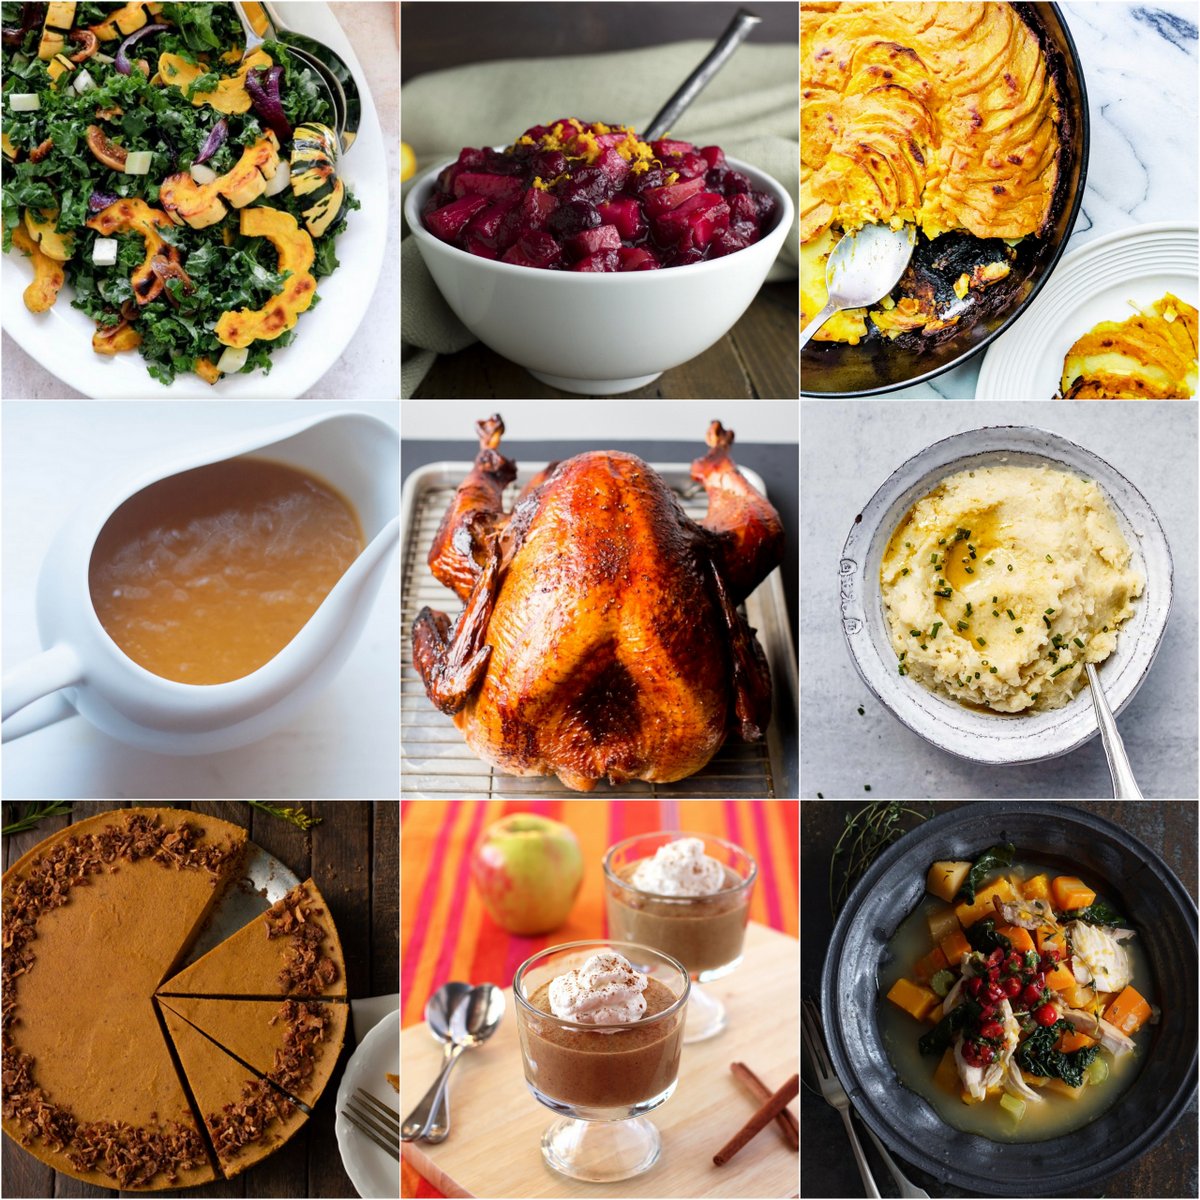 photo collage of featured recipes - turkey in the center